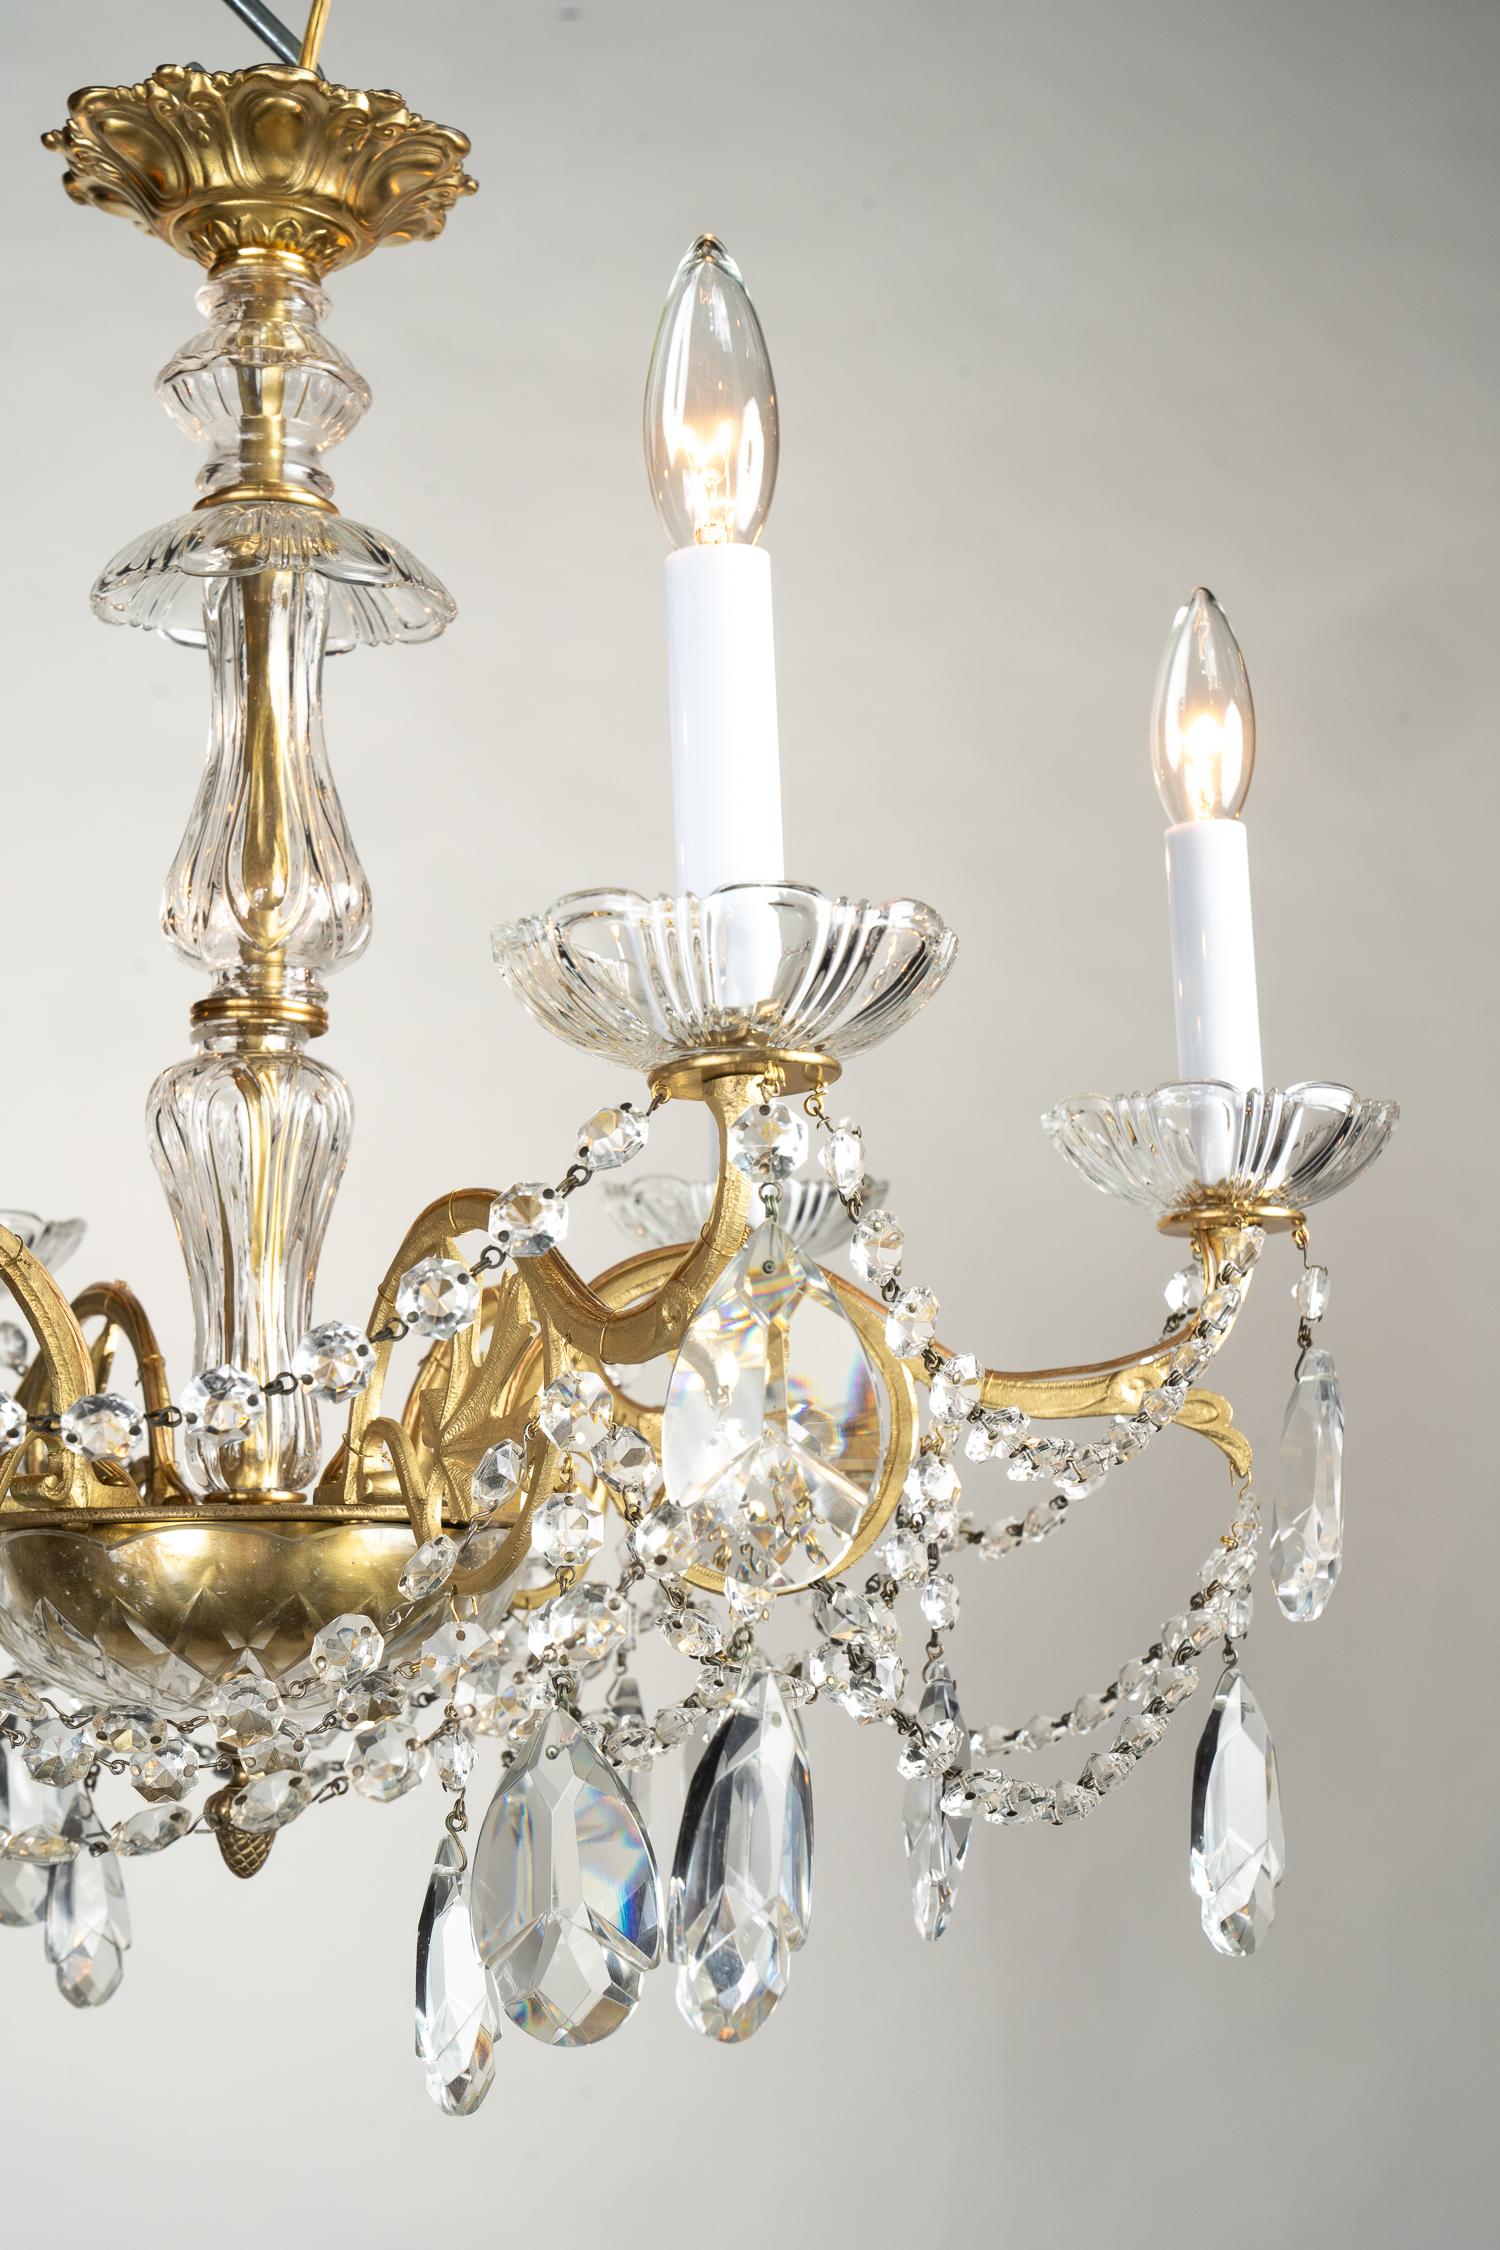 This French Louis XVI style chandelier is made of bronze, draped with beautiful crystals, and dates back to the late 19th century. The arms feature an oak leaf motif centered in the scroll work. More octagonal cut crystal drapes from arm to arm